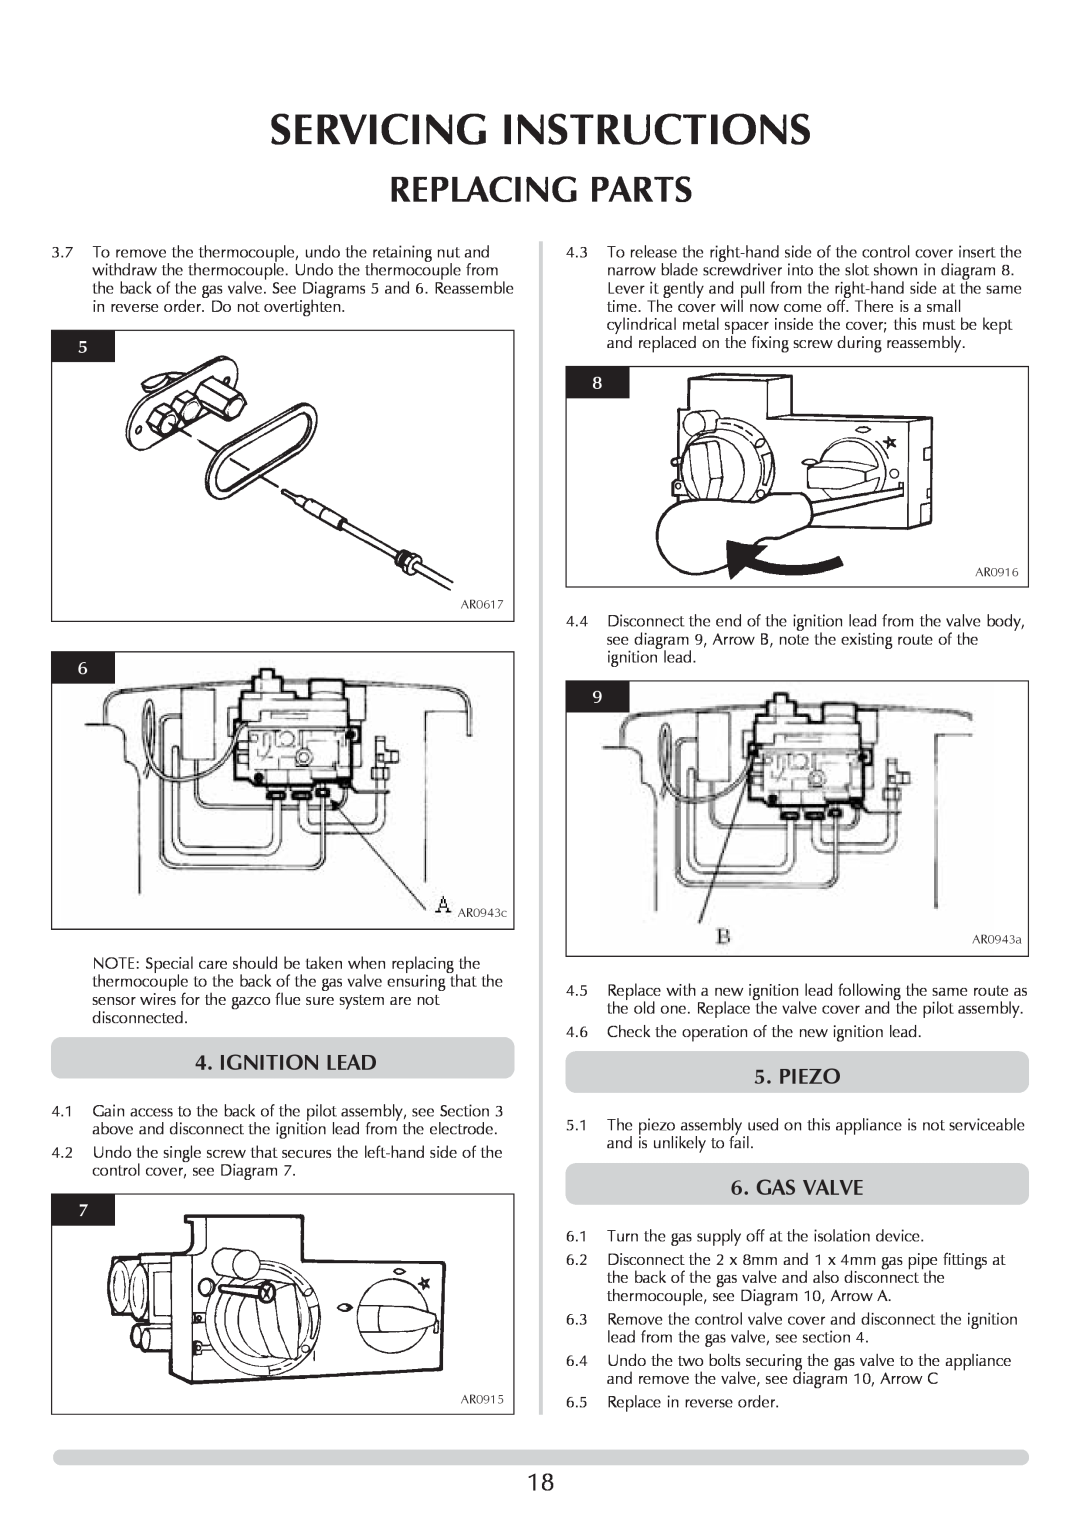 Stovax 705088 manual Servicing Instructions, Replacing Parts, Ignition Lead, Piezo, Gas Valve 